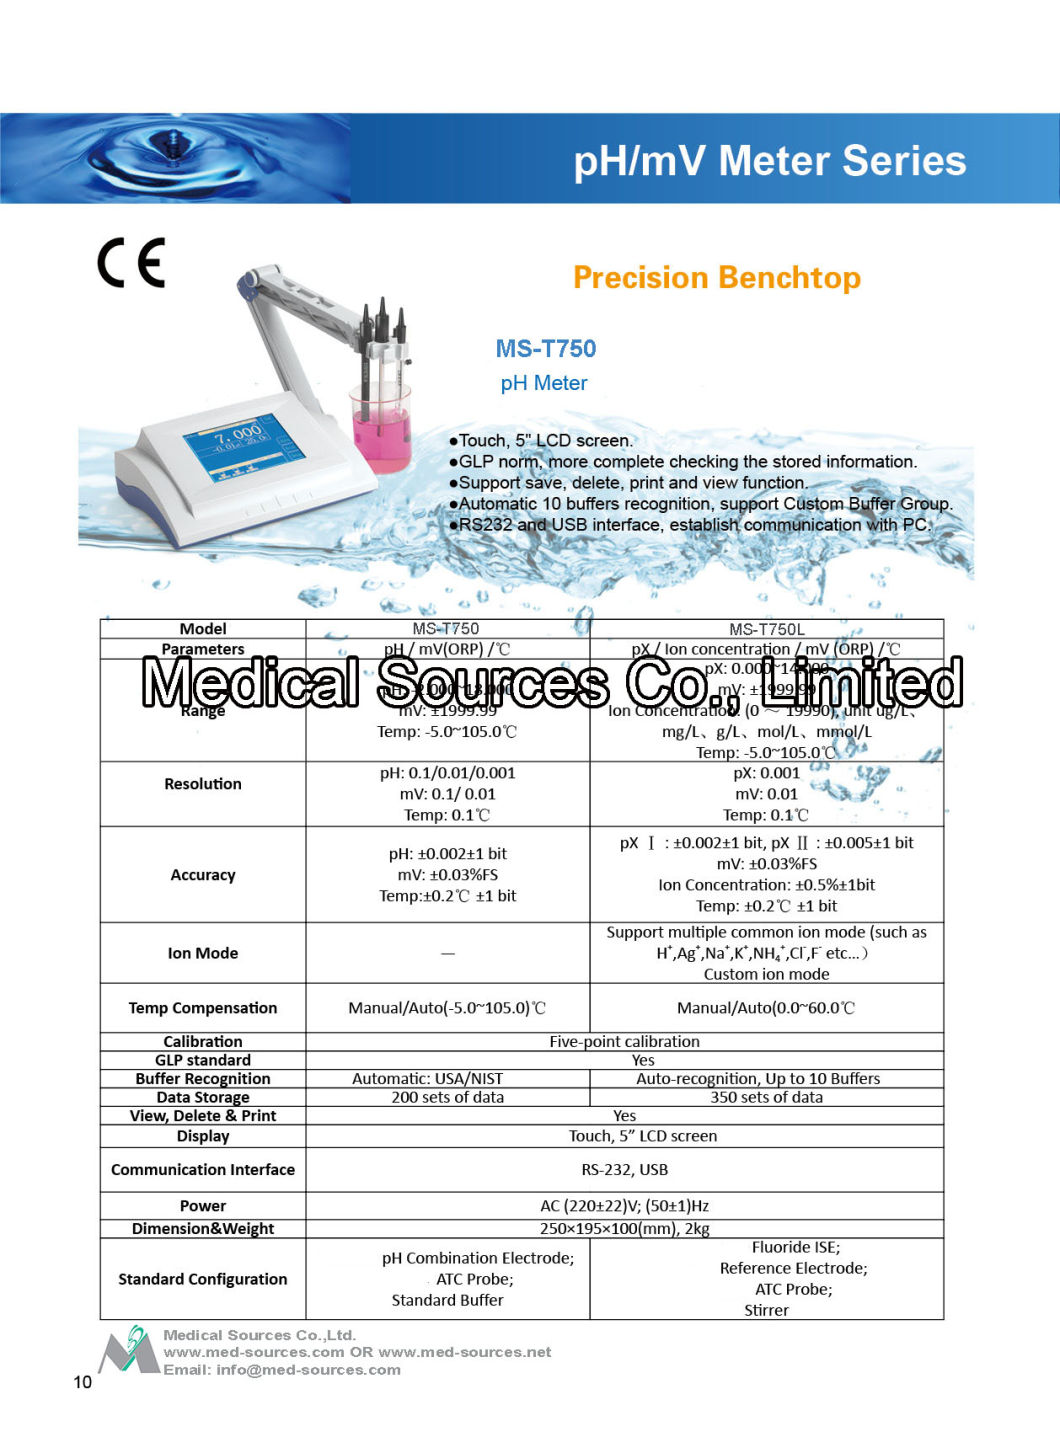 (MS-T750) Large LED Display Bench Top Table Top pH Meter